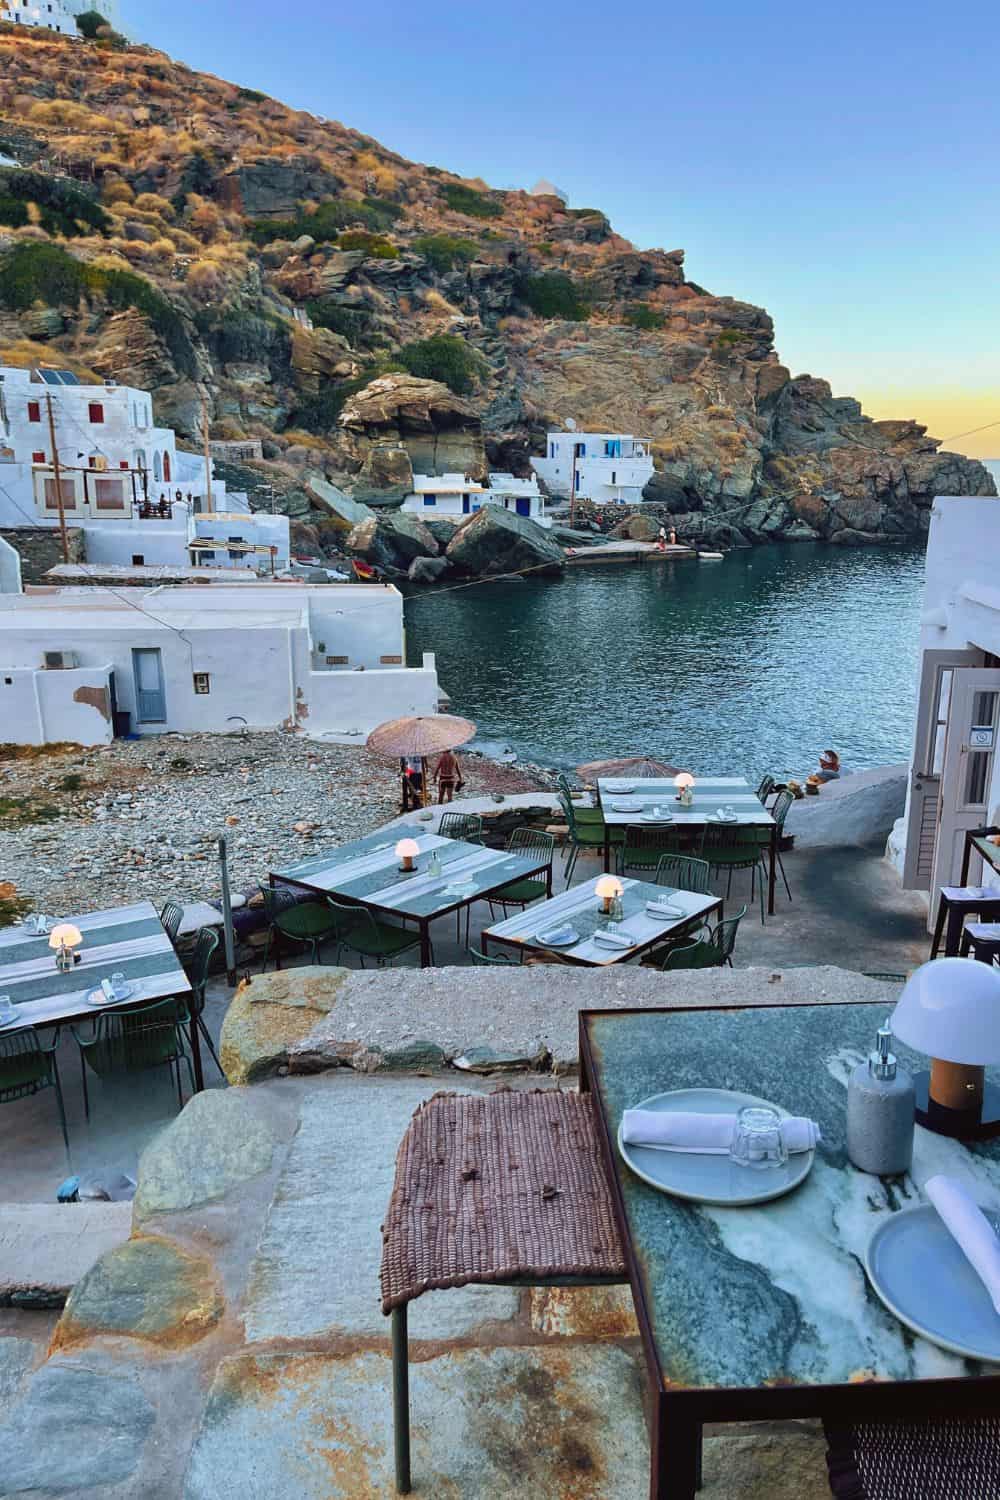 A picturesque outdoor dining setting in Sifnos overlooking a tranquil cove with azure waters. The tables are set with simple elegance against the backdrop of white-washed buildings and rugged cliffs, offering an immersive dining experience that prompts one to consider the charm of the island.
